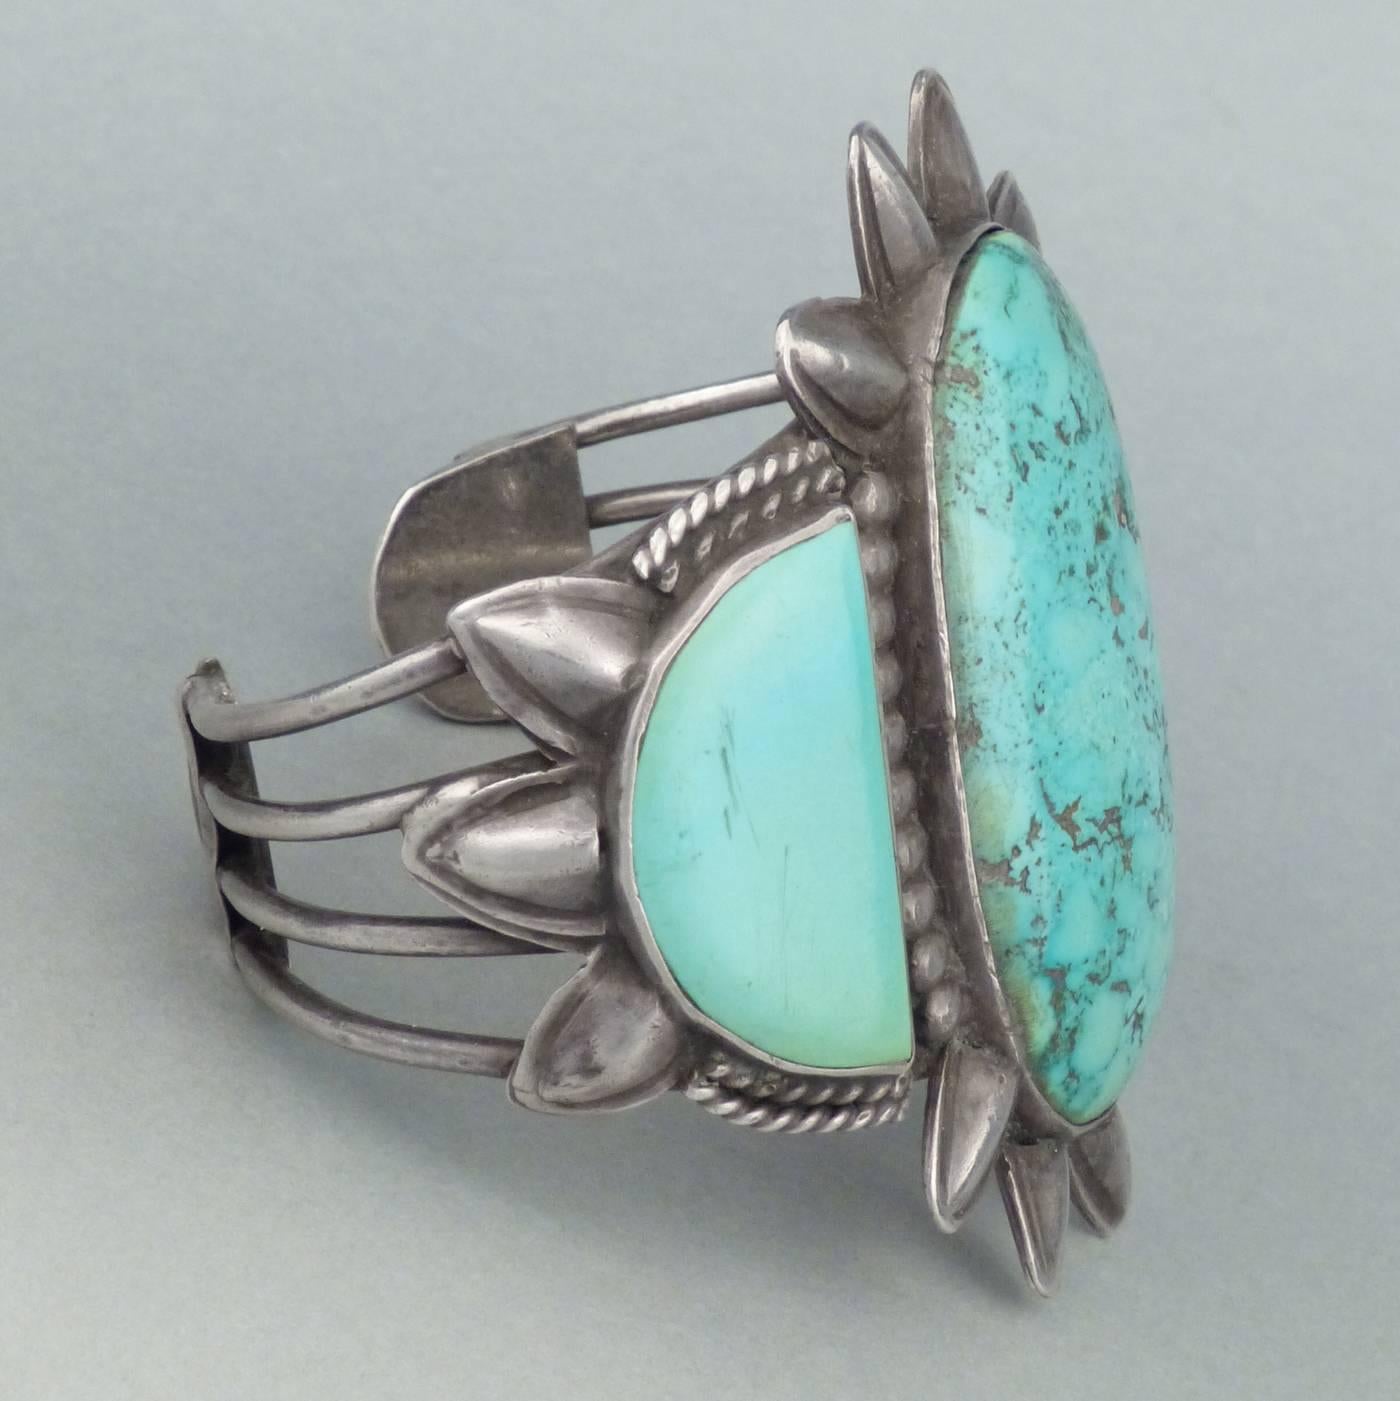 Navajo Vintage Silver and Turquoise Cuff, circa 1930